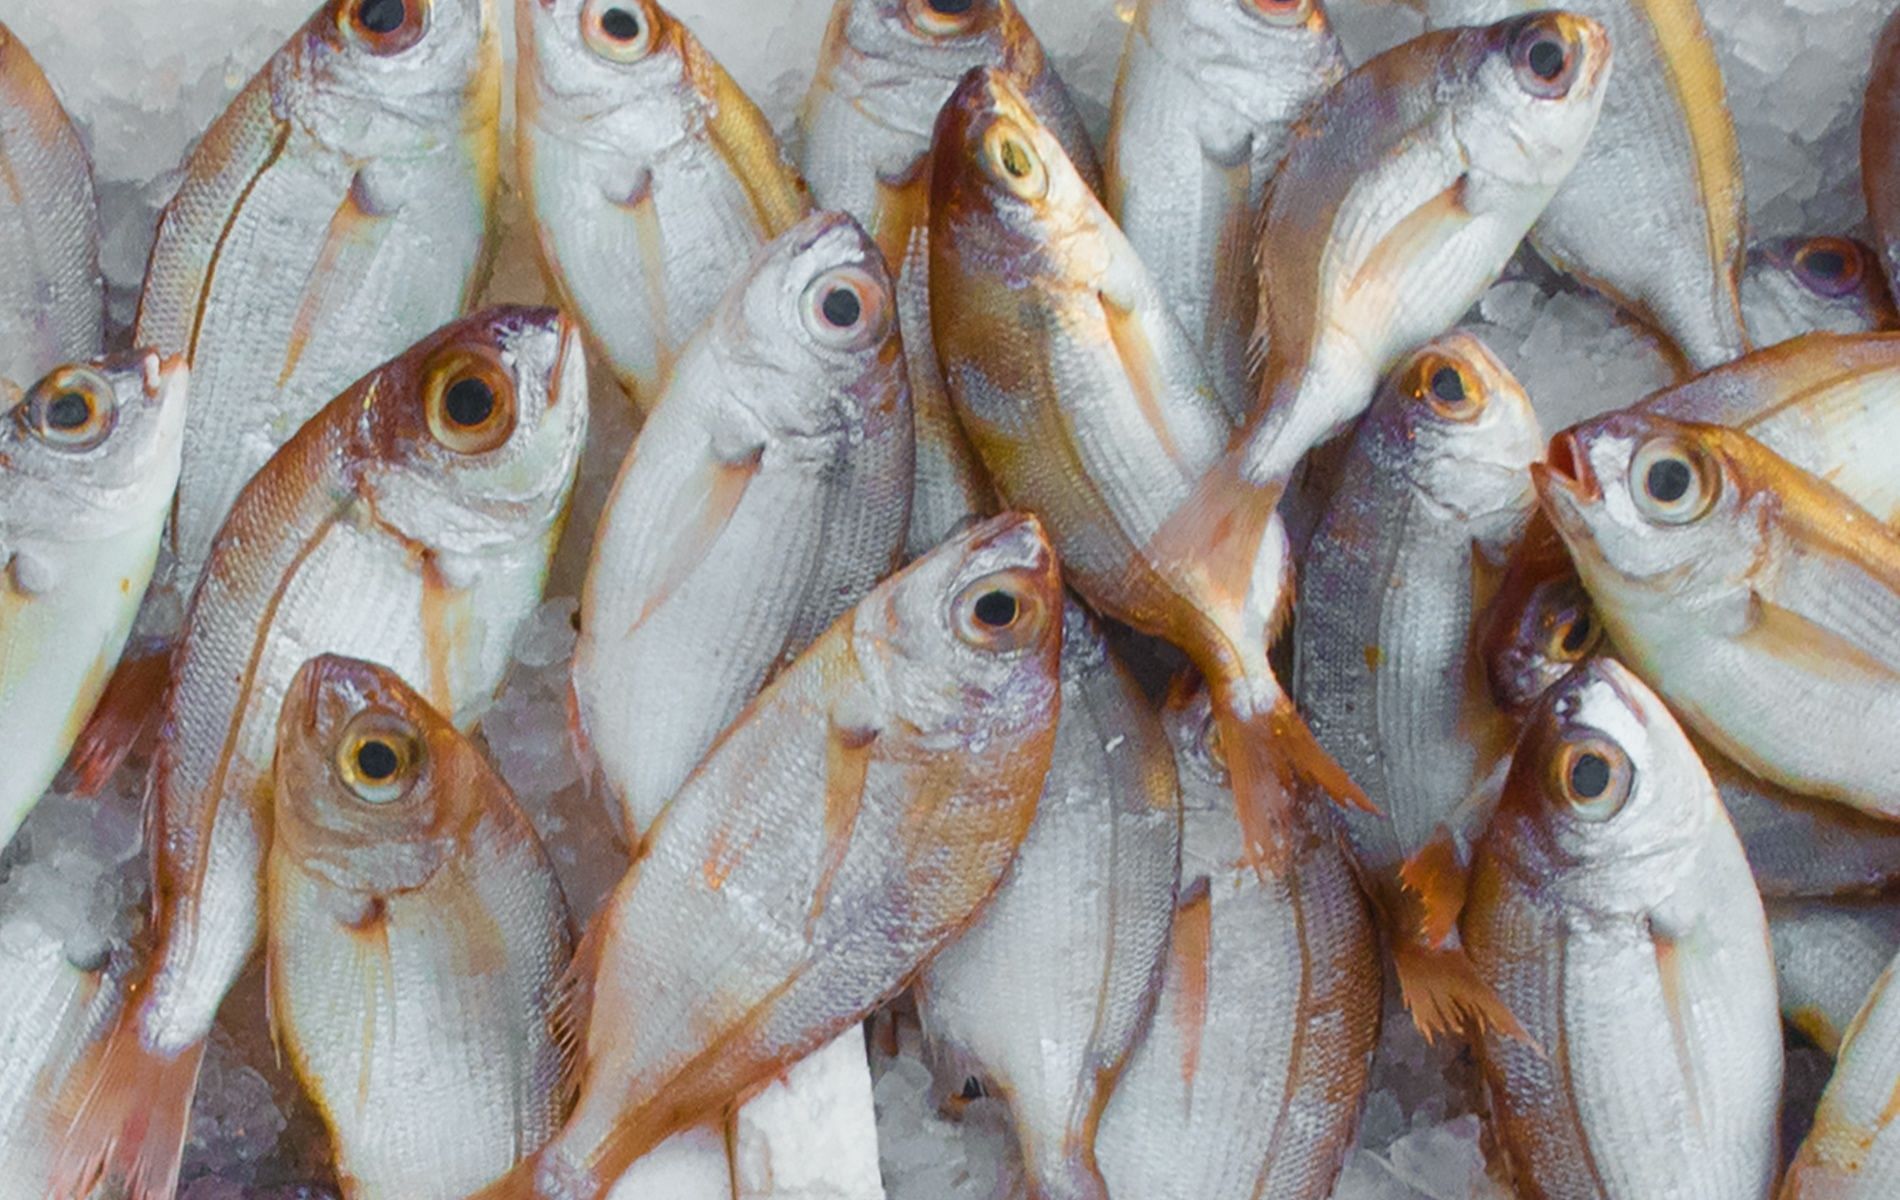 Eating fish can increase lifespan, according to research (Image by Mali Maeder via Pexels)